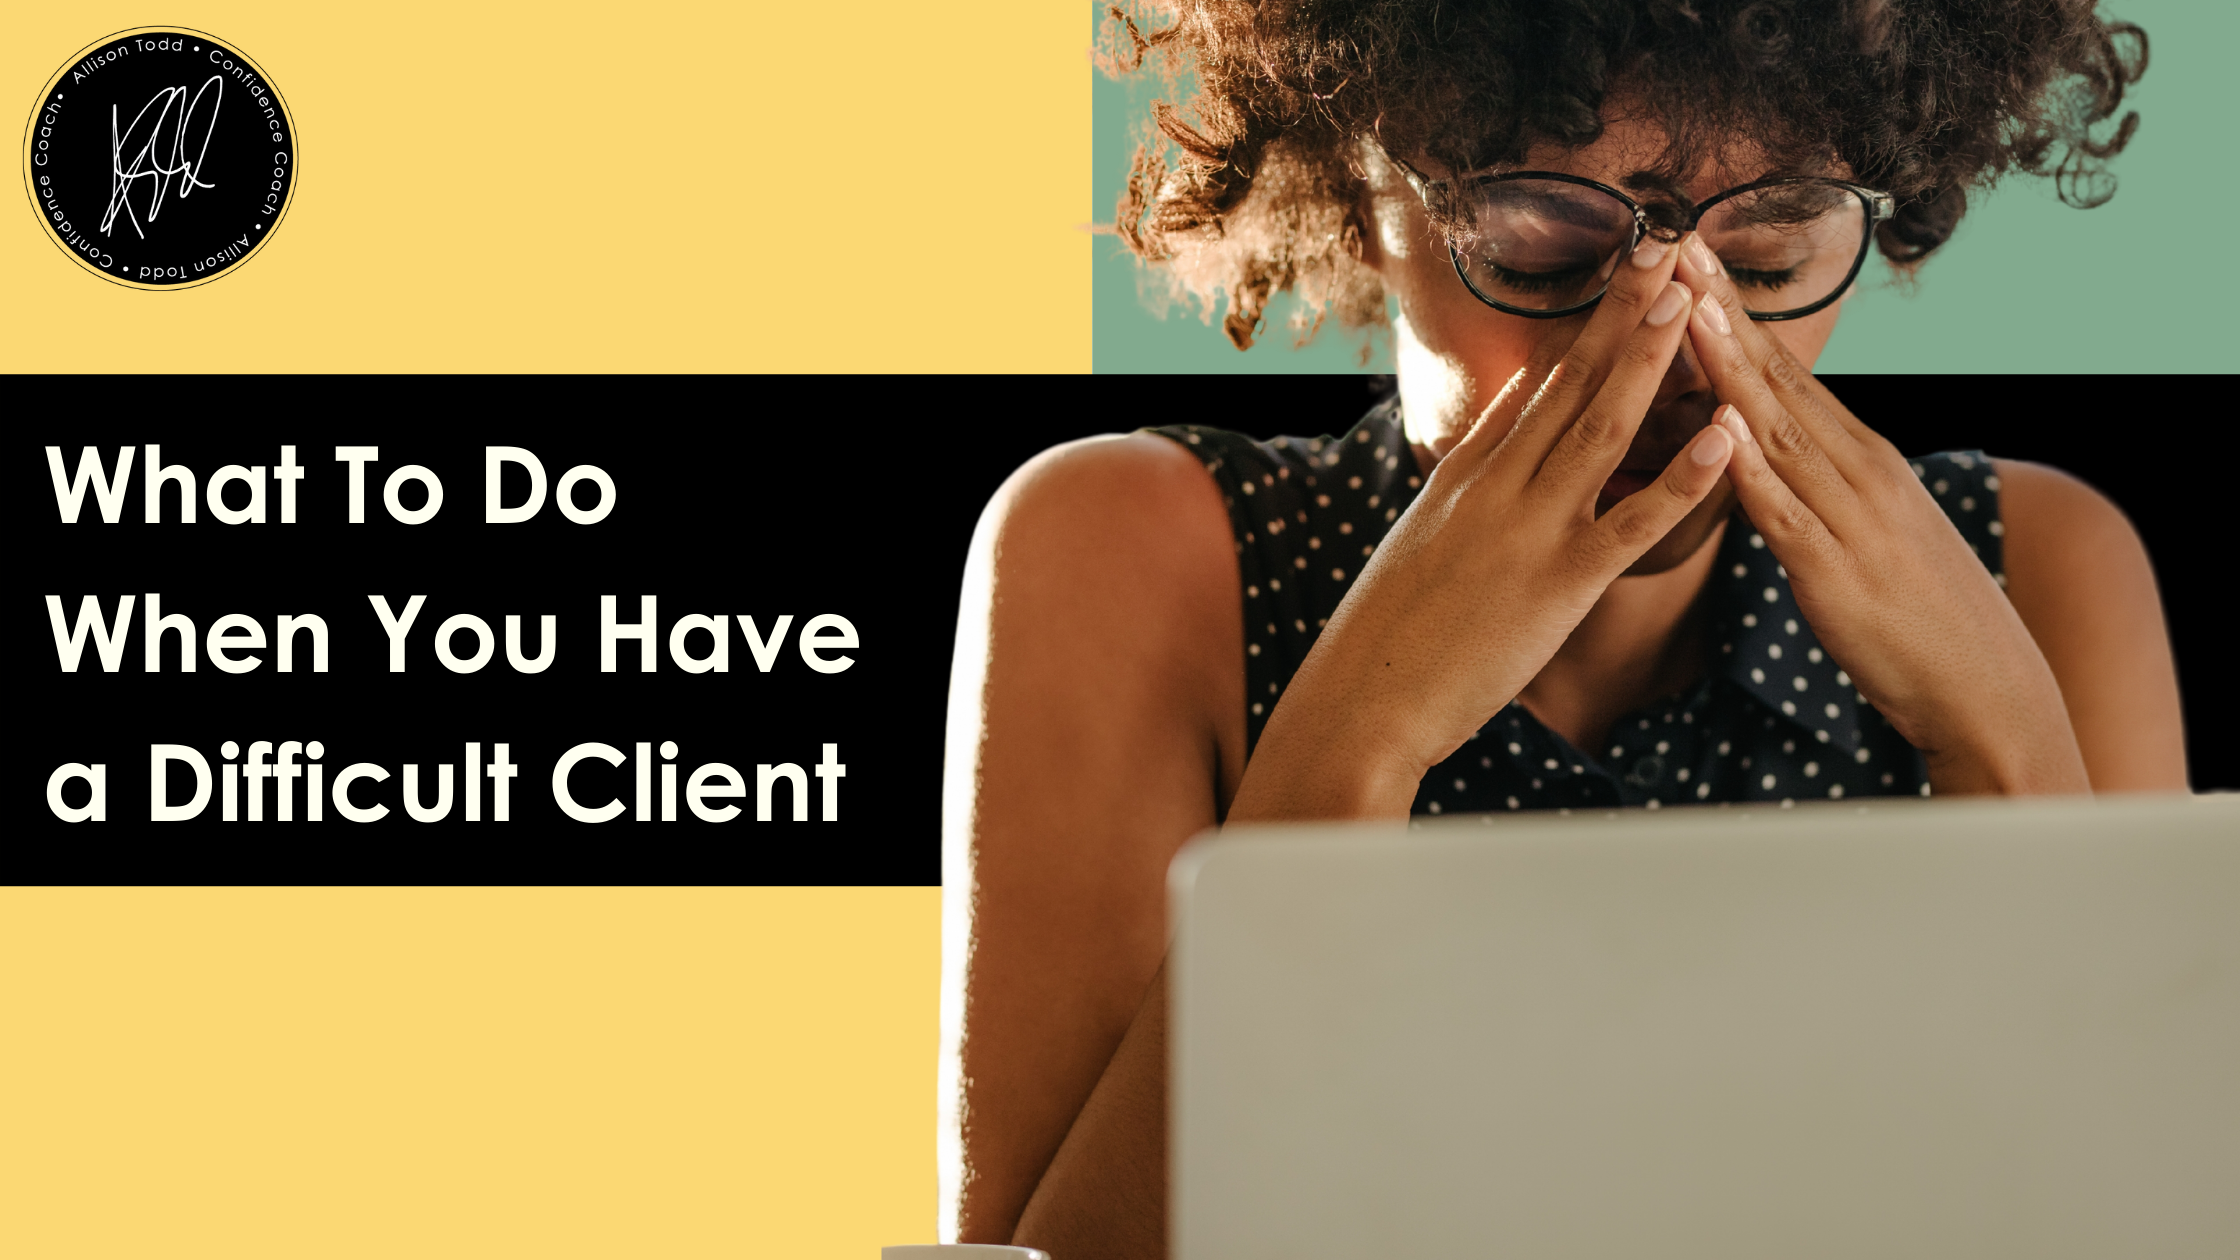 What To Do When You Have a Difficult Client